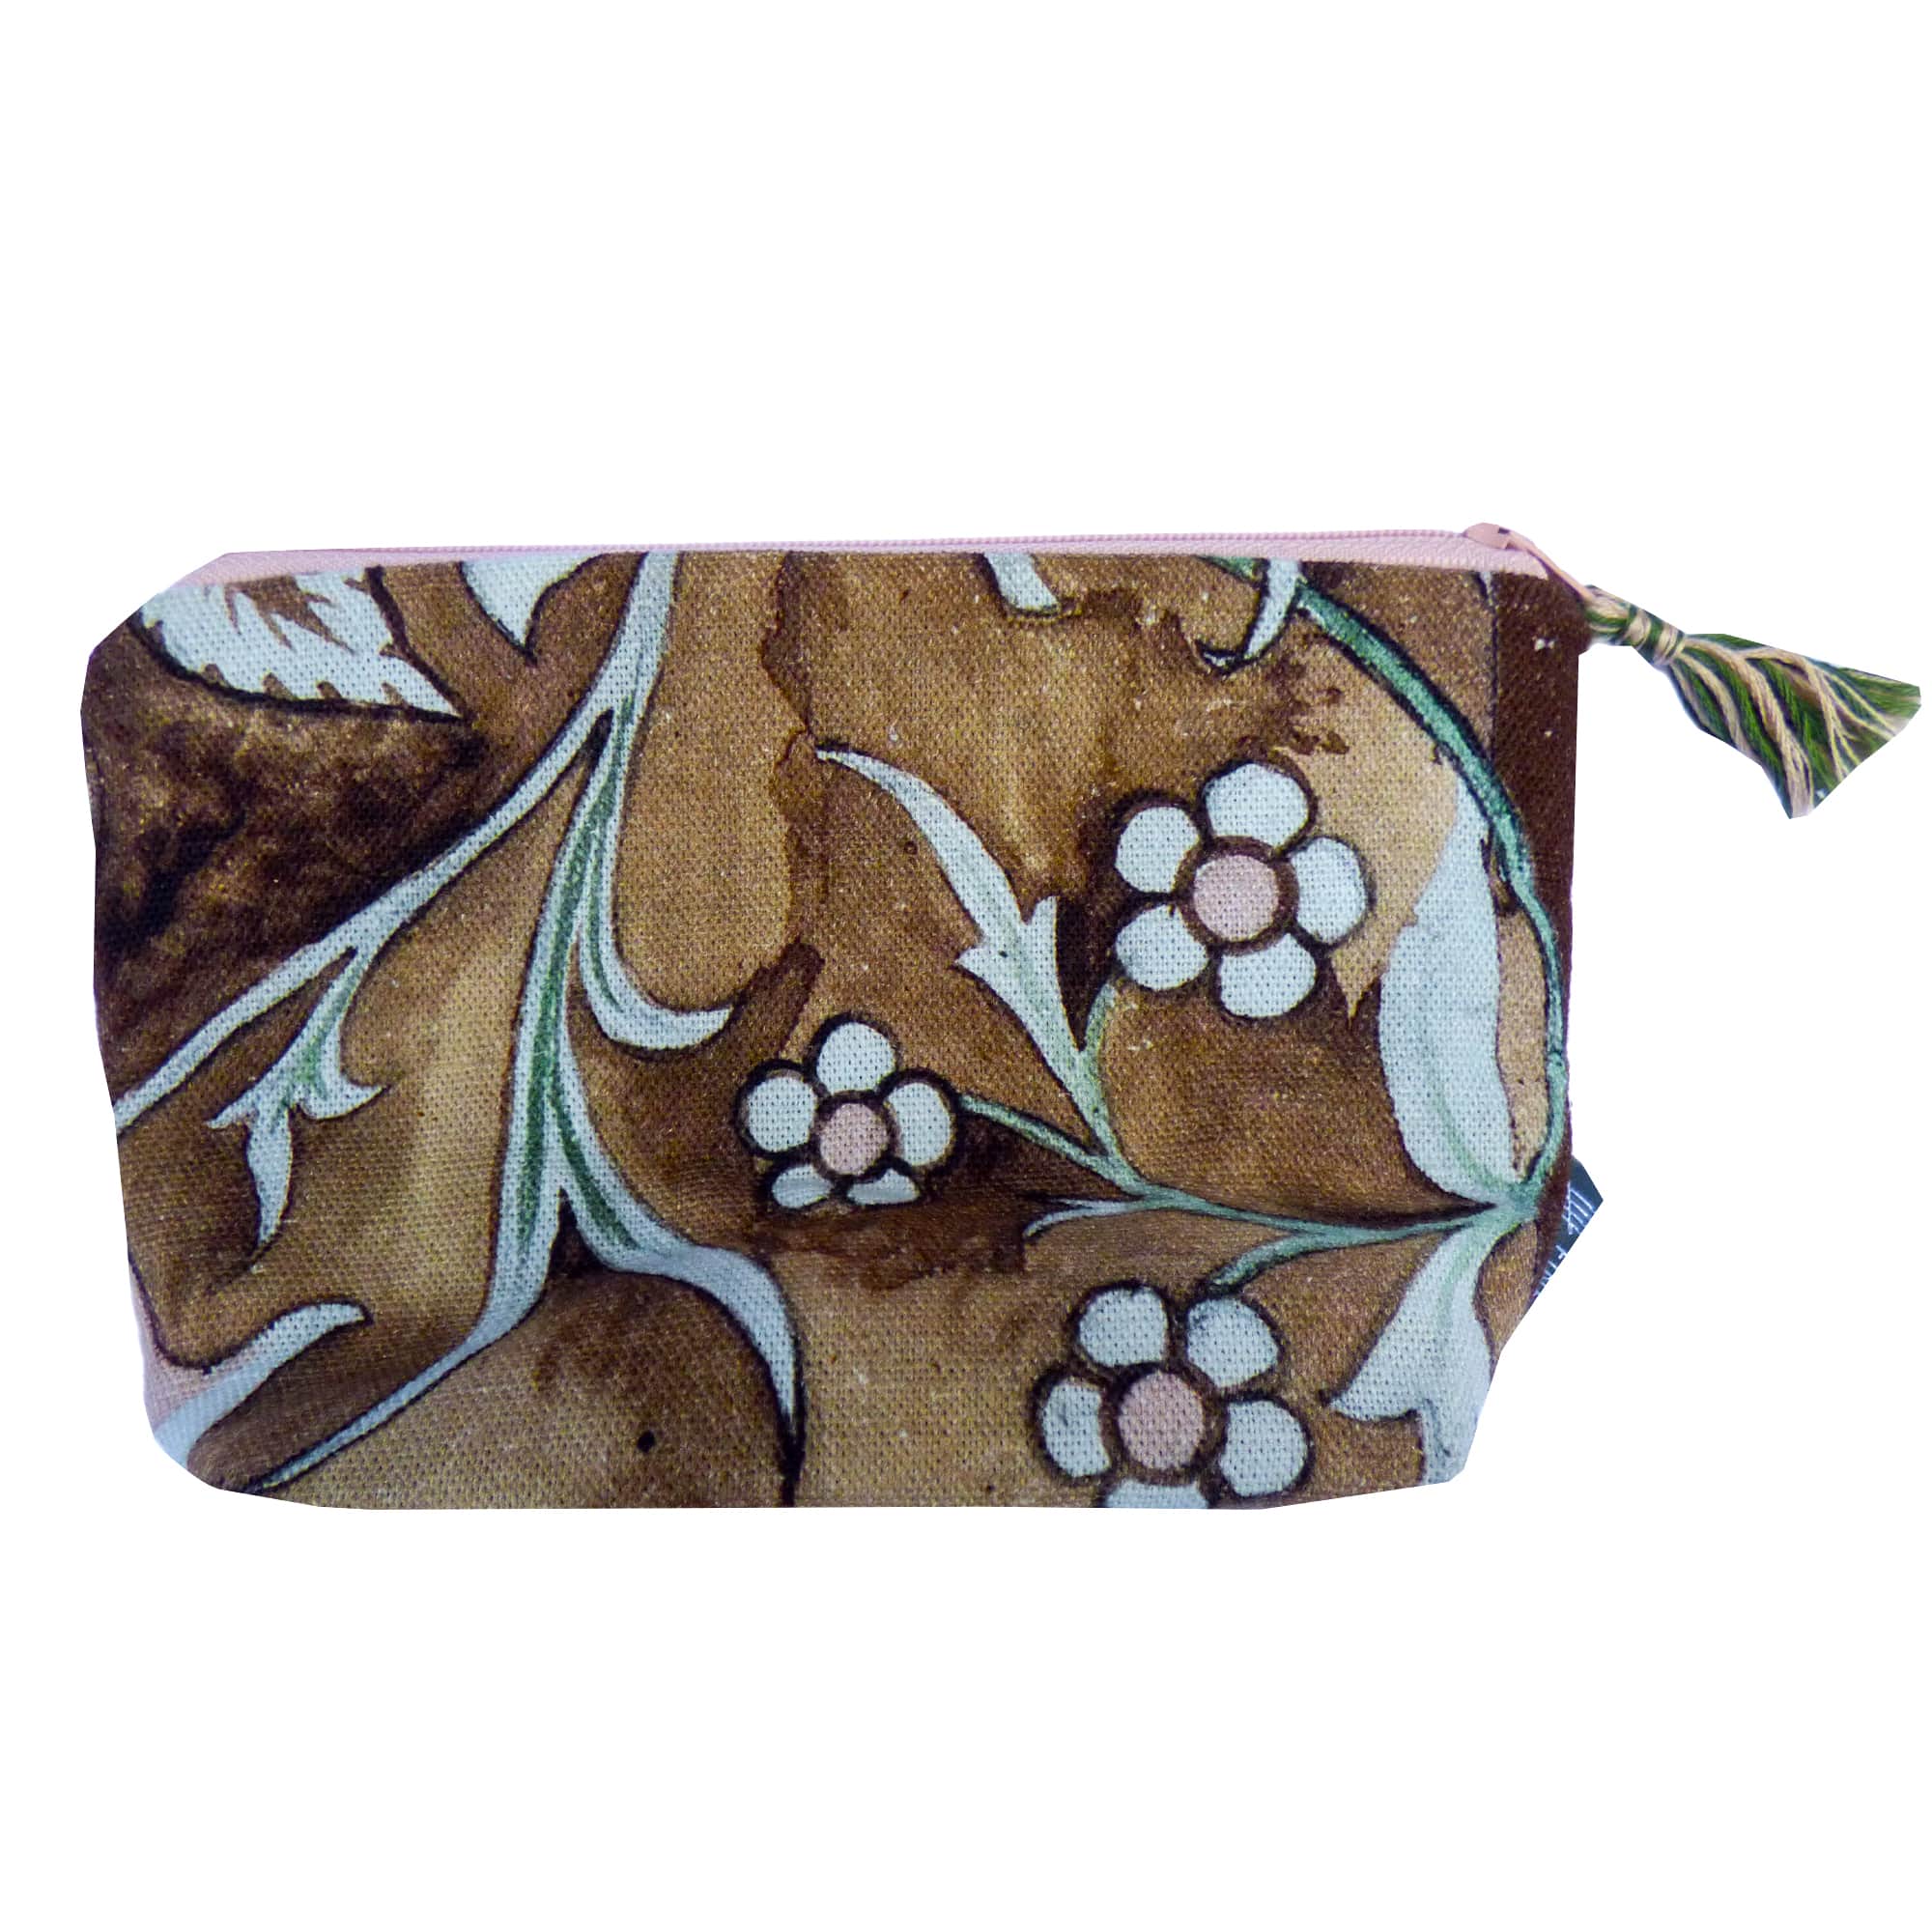 The William Morris Society Flowers Pouch